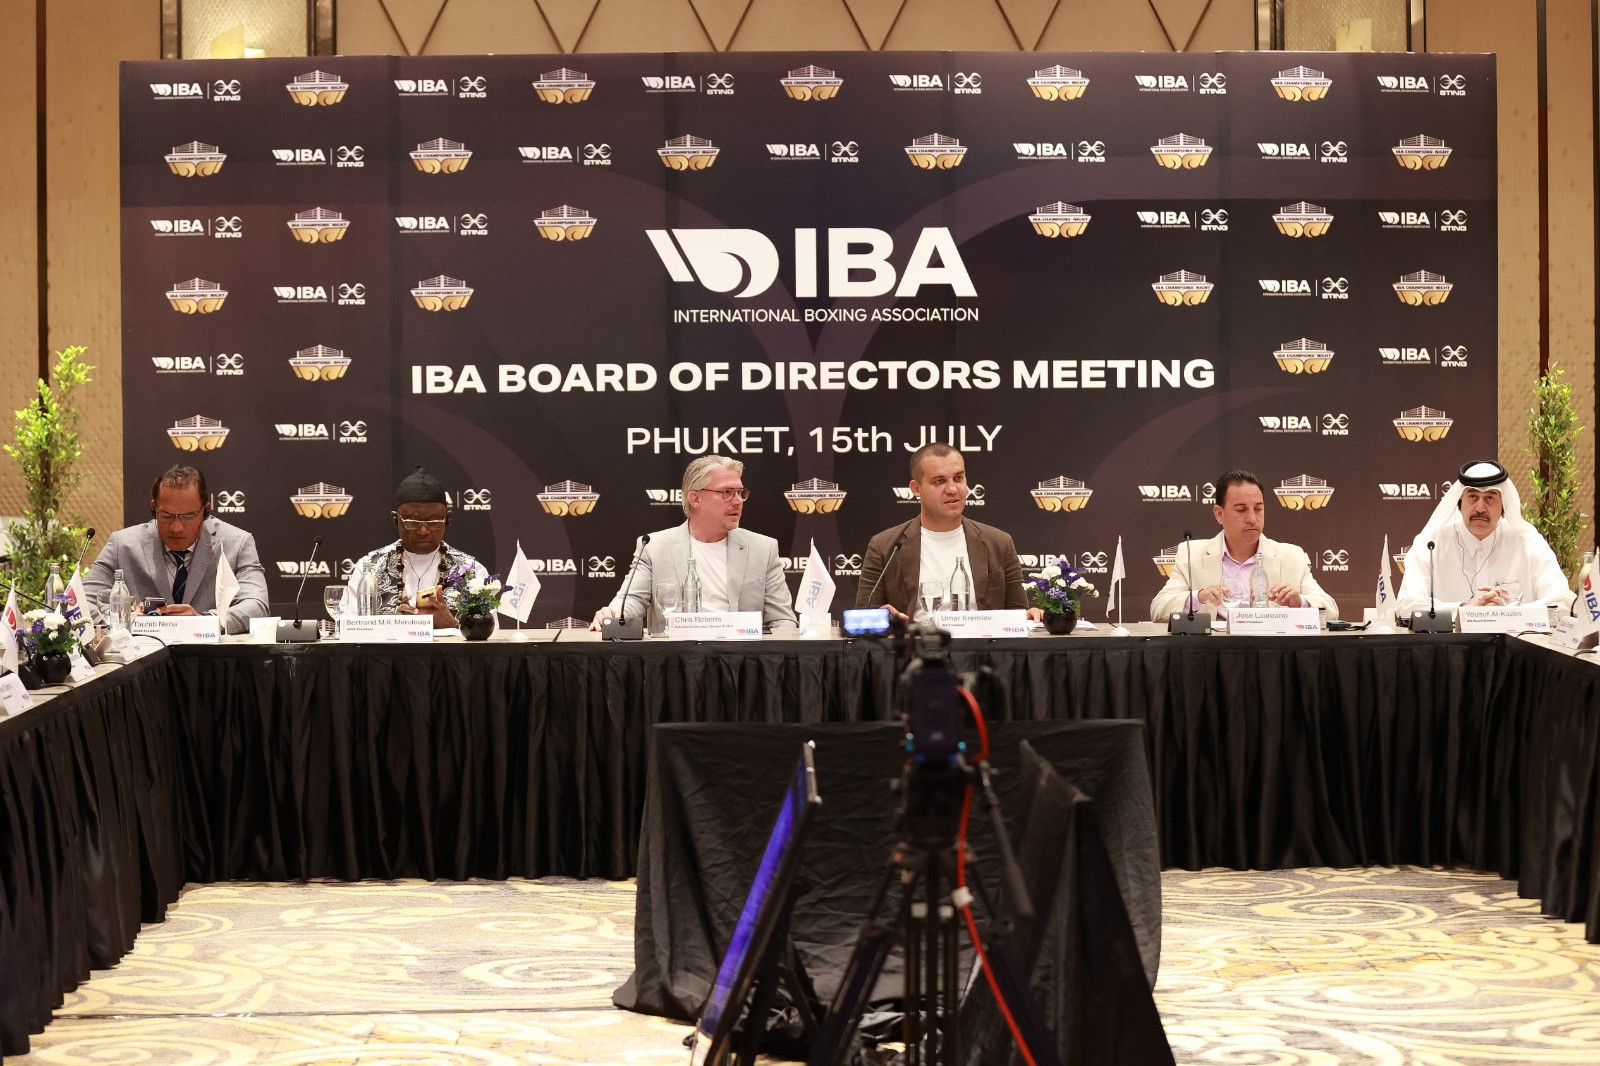 IBA Board of Directors discuss Olympic expulsion during meeting